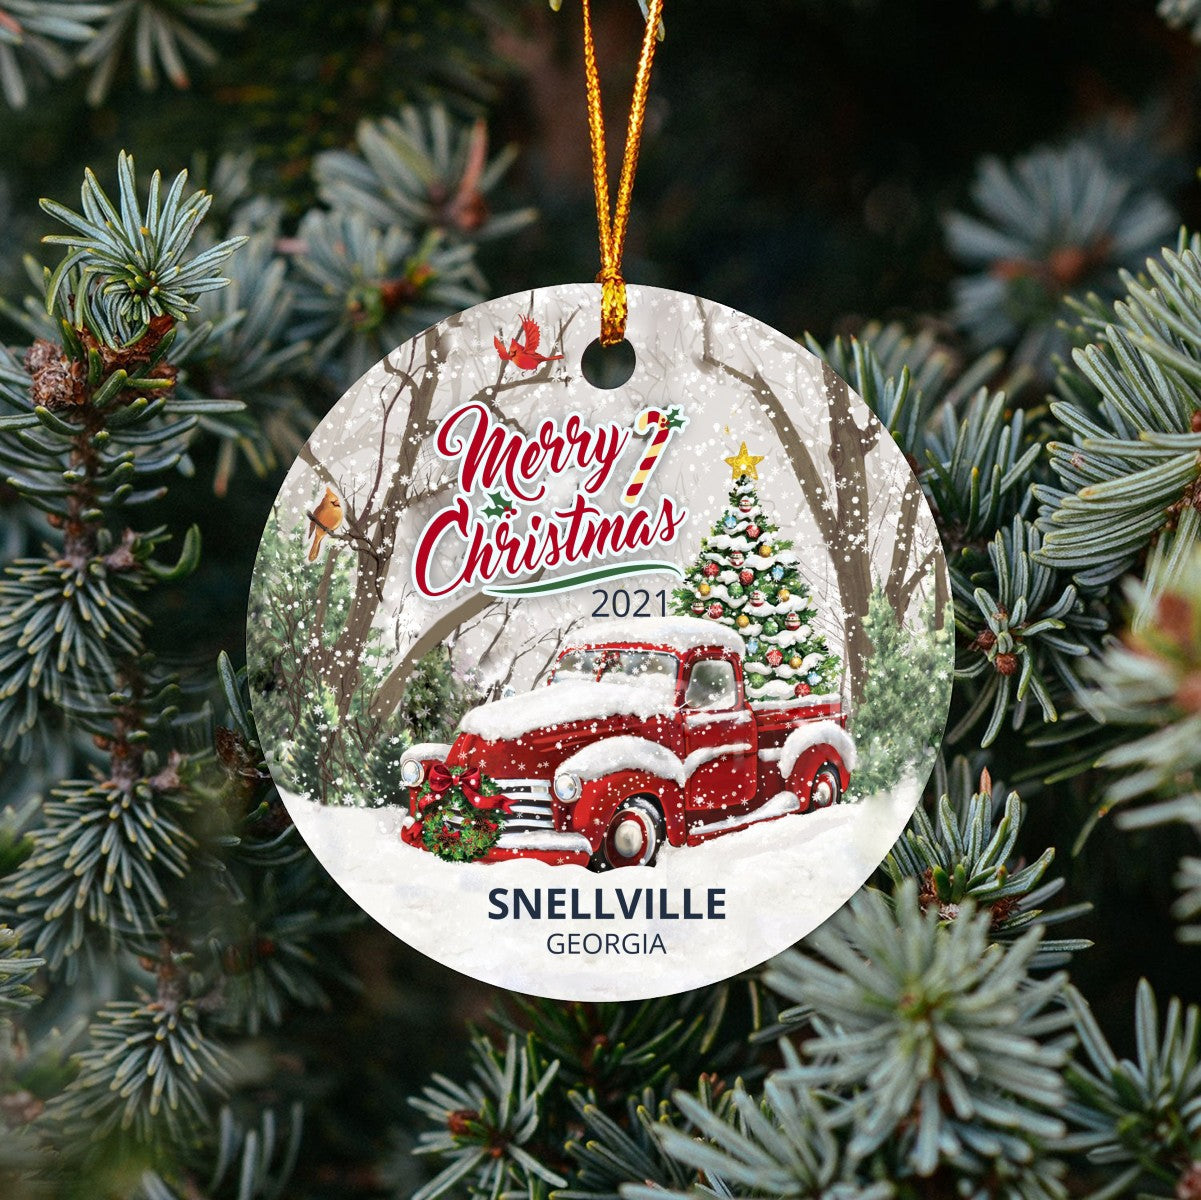 Christmas Tree Ornaments Snellville - Ornament Customize With Name City And State Snellville Georgia GA - Red Truck Xmas Ornaments 3'' Plastic Gift For Family, Friend And Housewarming